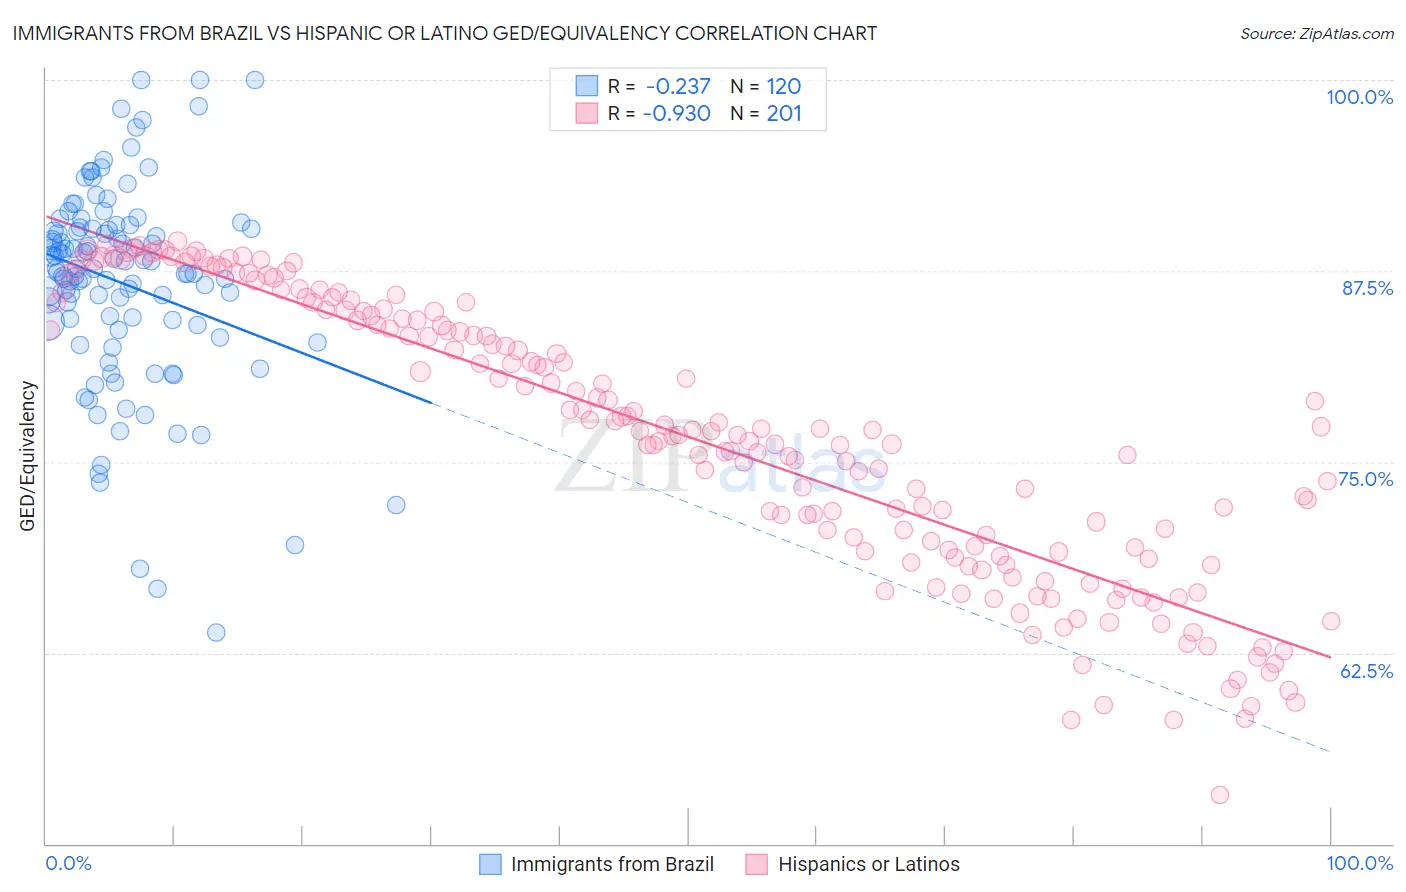 Immigrants from Brazil vs Hispanic or Latino GED/Equivalency